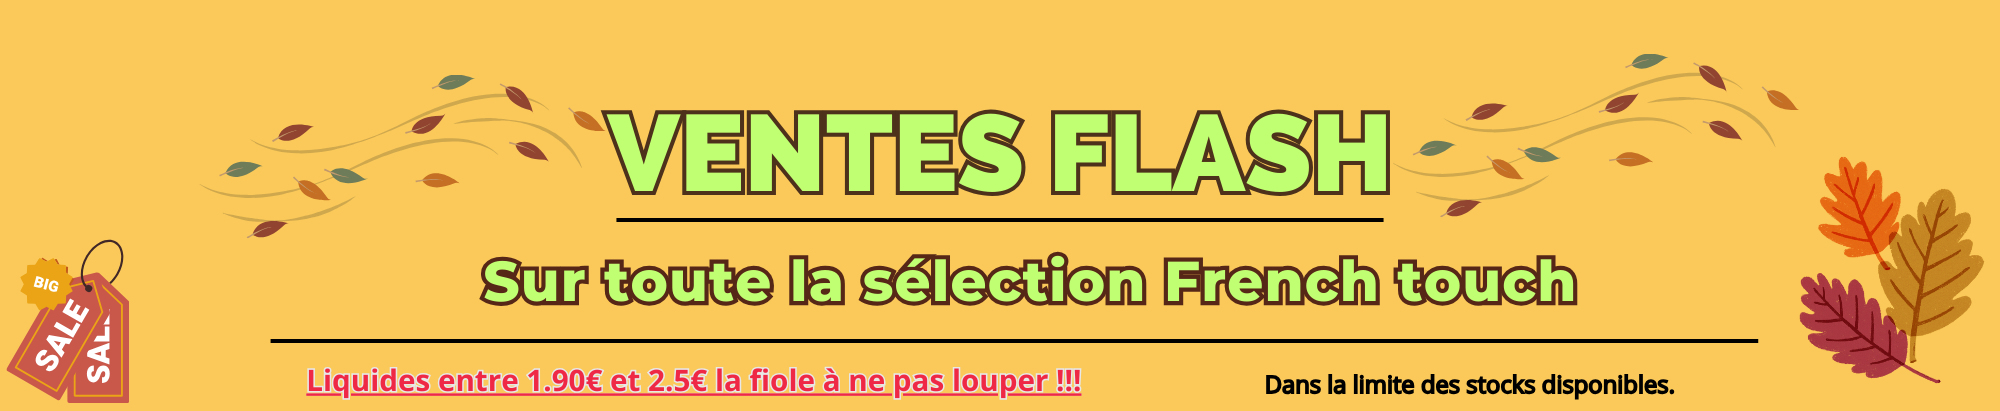 ventes-flash-french-touch-1-